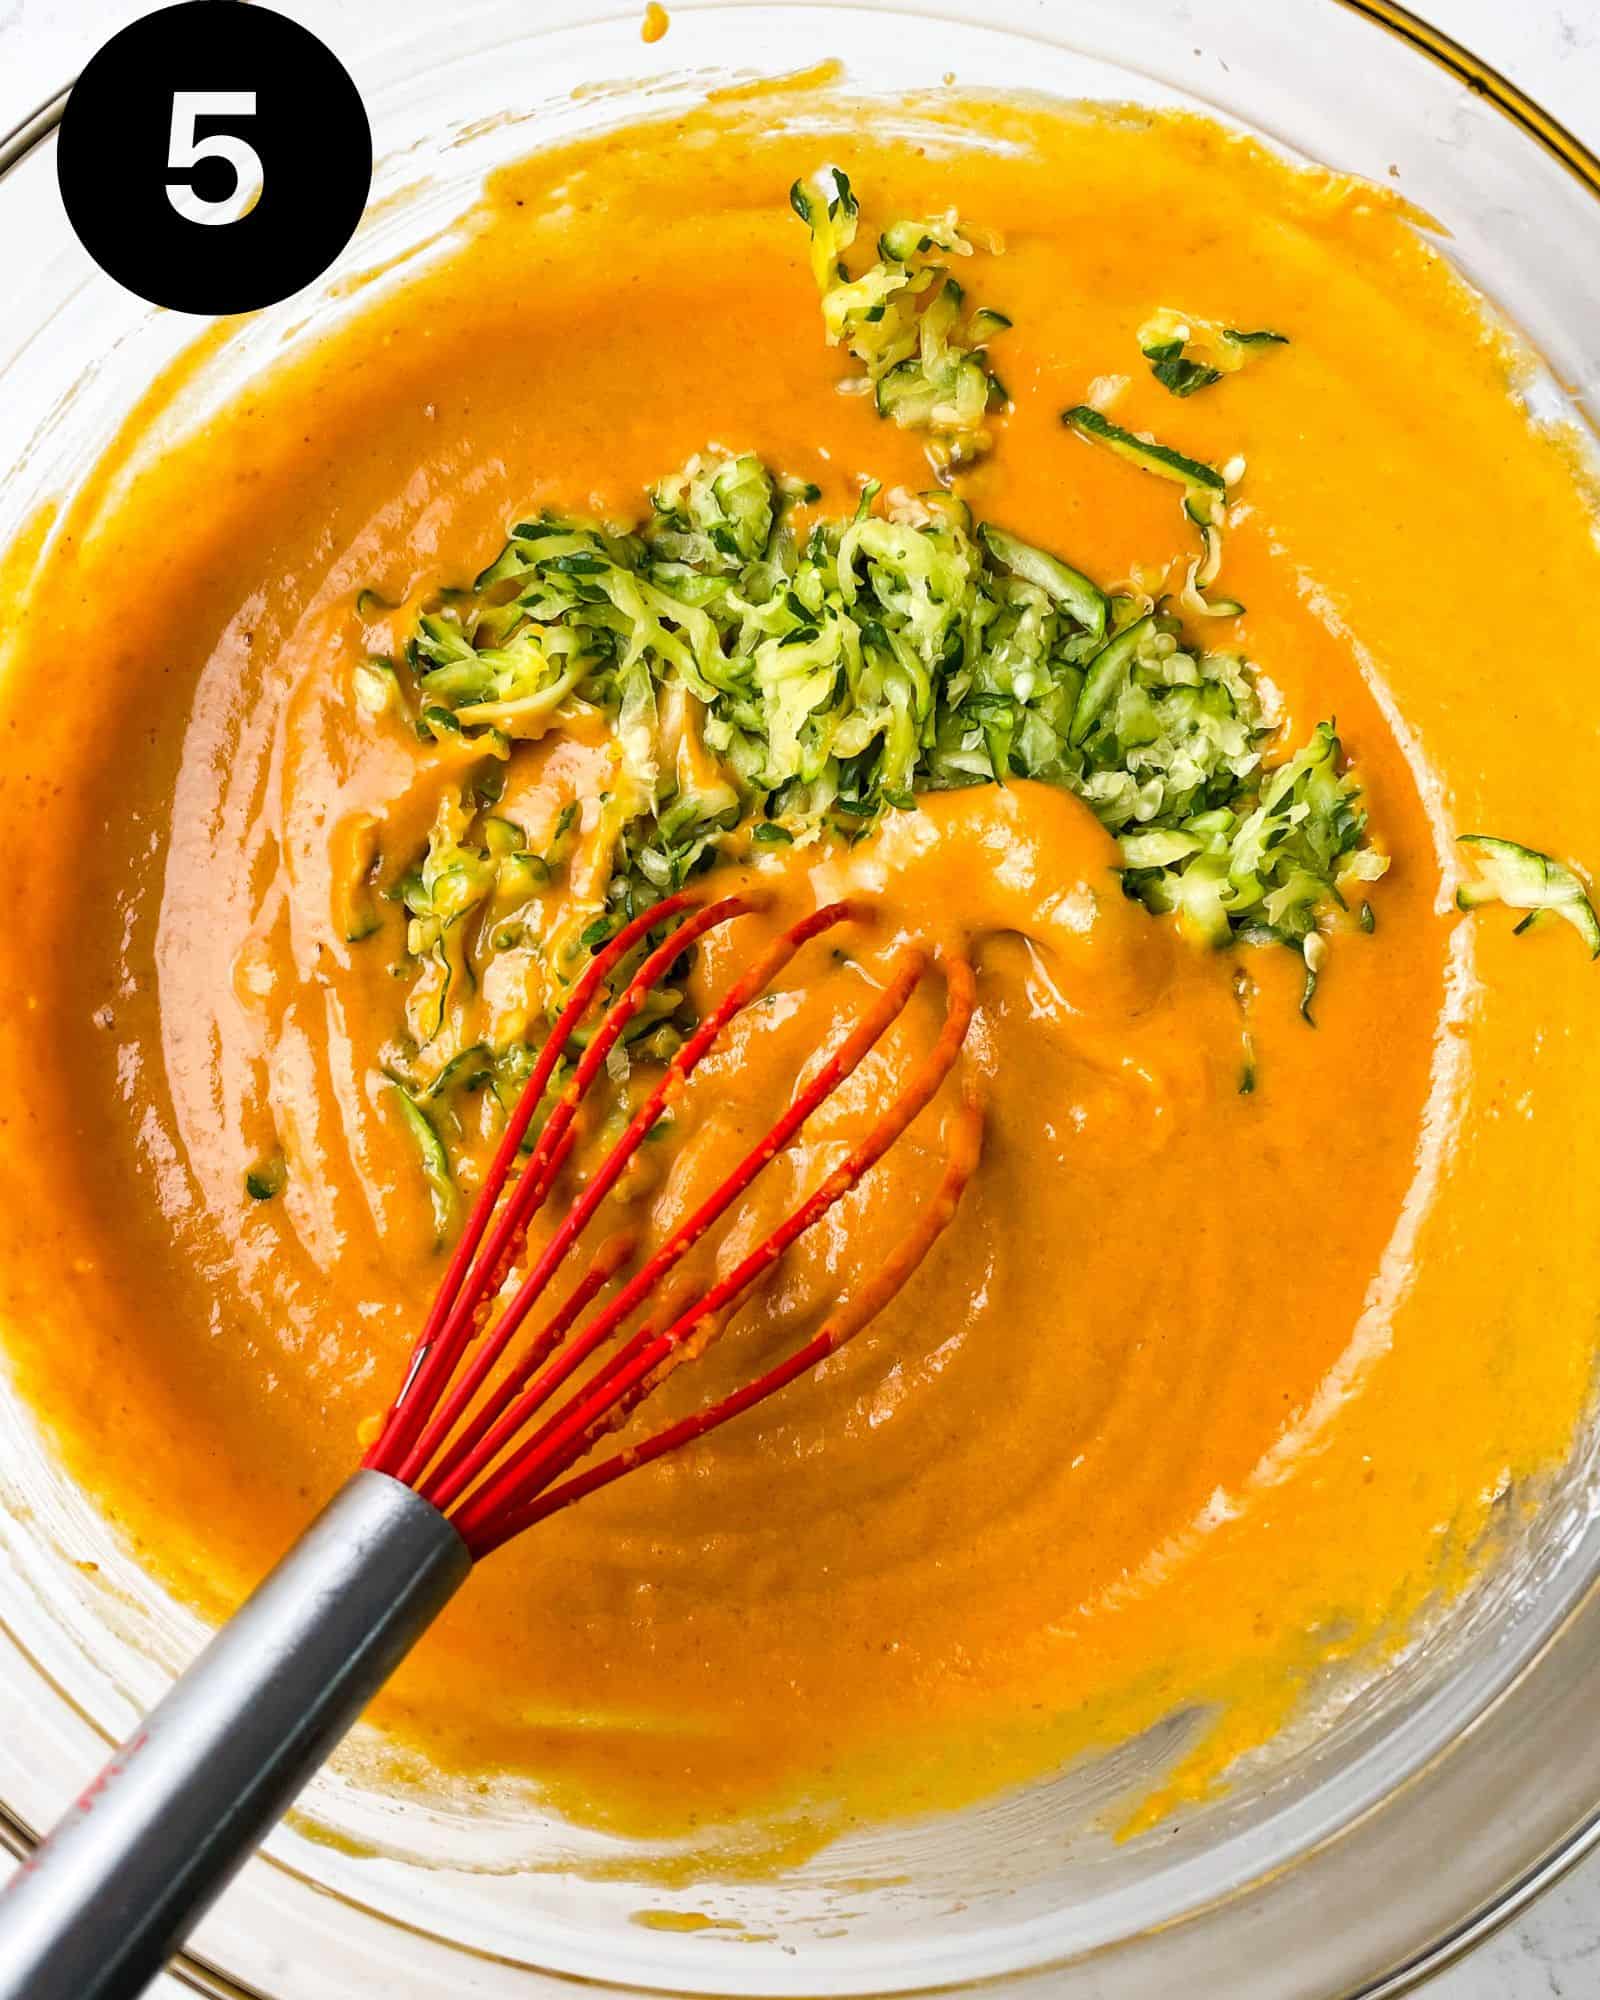 pumpkin muffin batter in a bowl with grated zucchini.